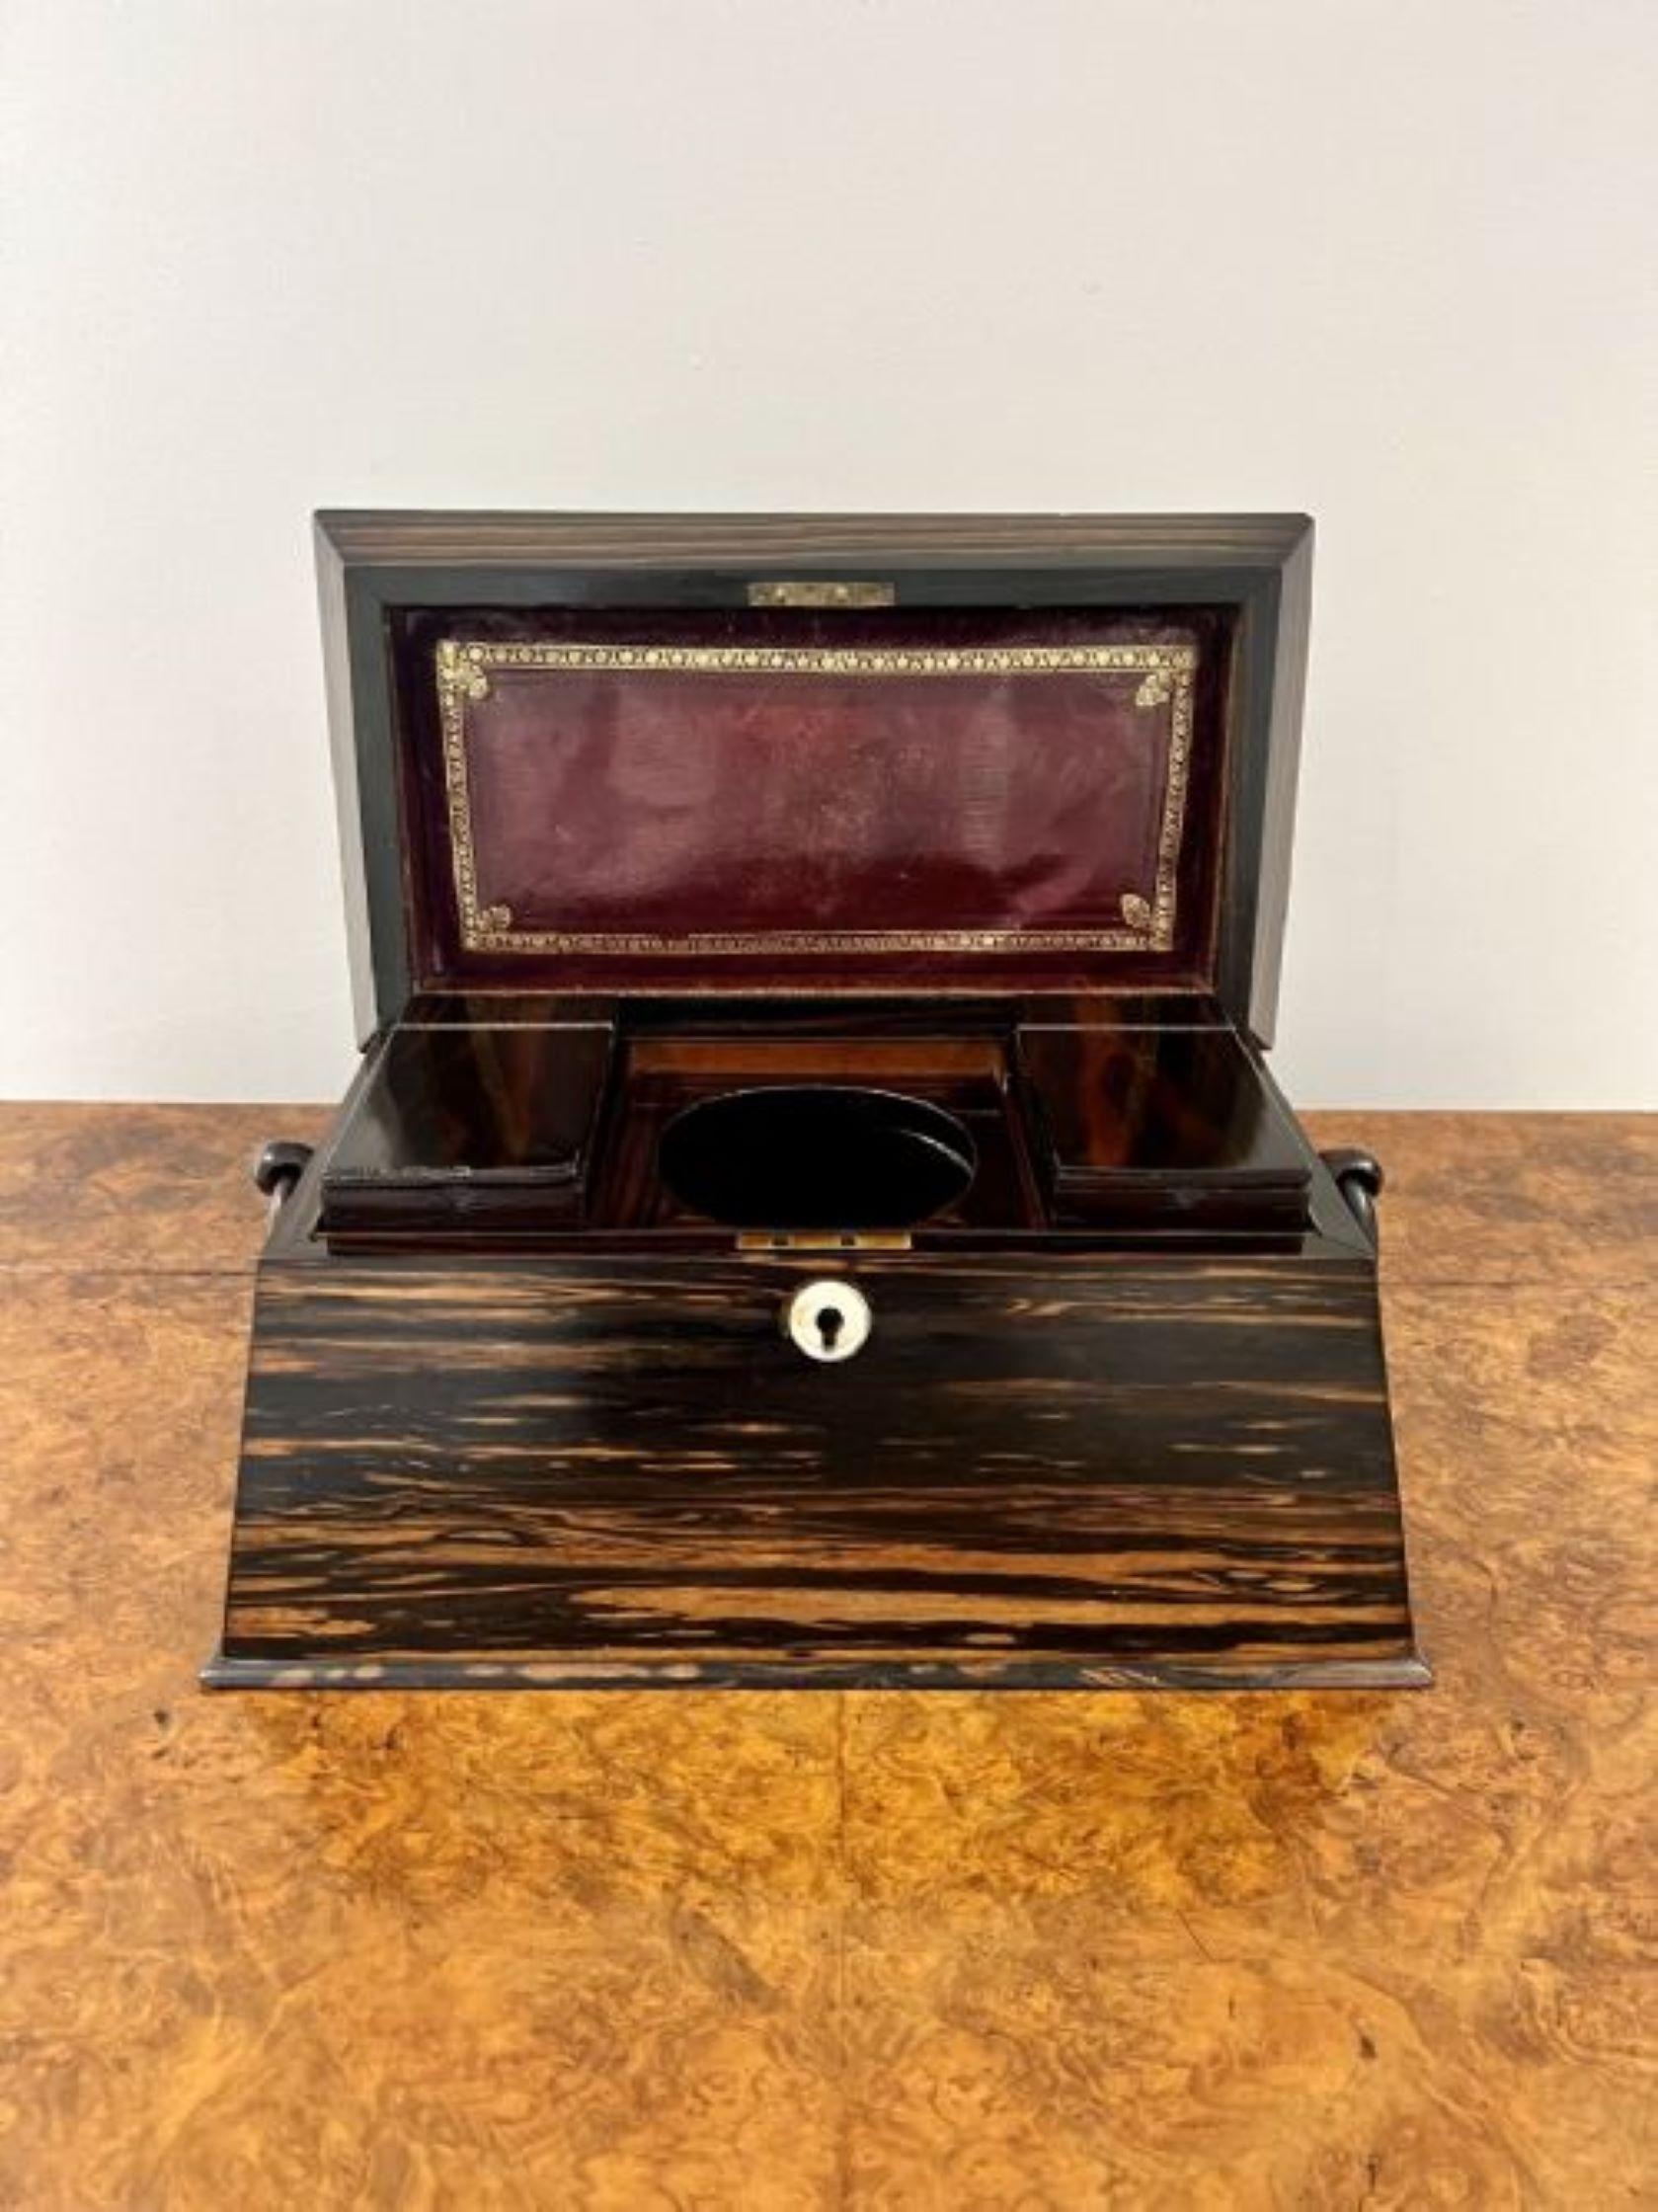 Fantastic quality antique regency coromandel wood tea caddy having a quality coromandel wood tea caddy with ringlet carrying handles to both sides and a lift up top opening to reveal pair of tea caddies.

D. 1830